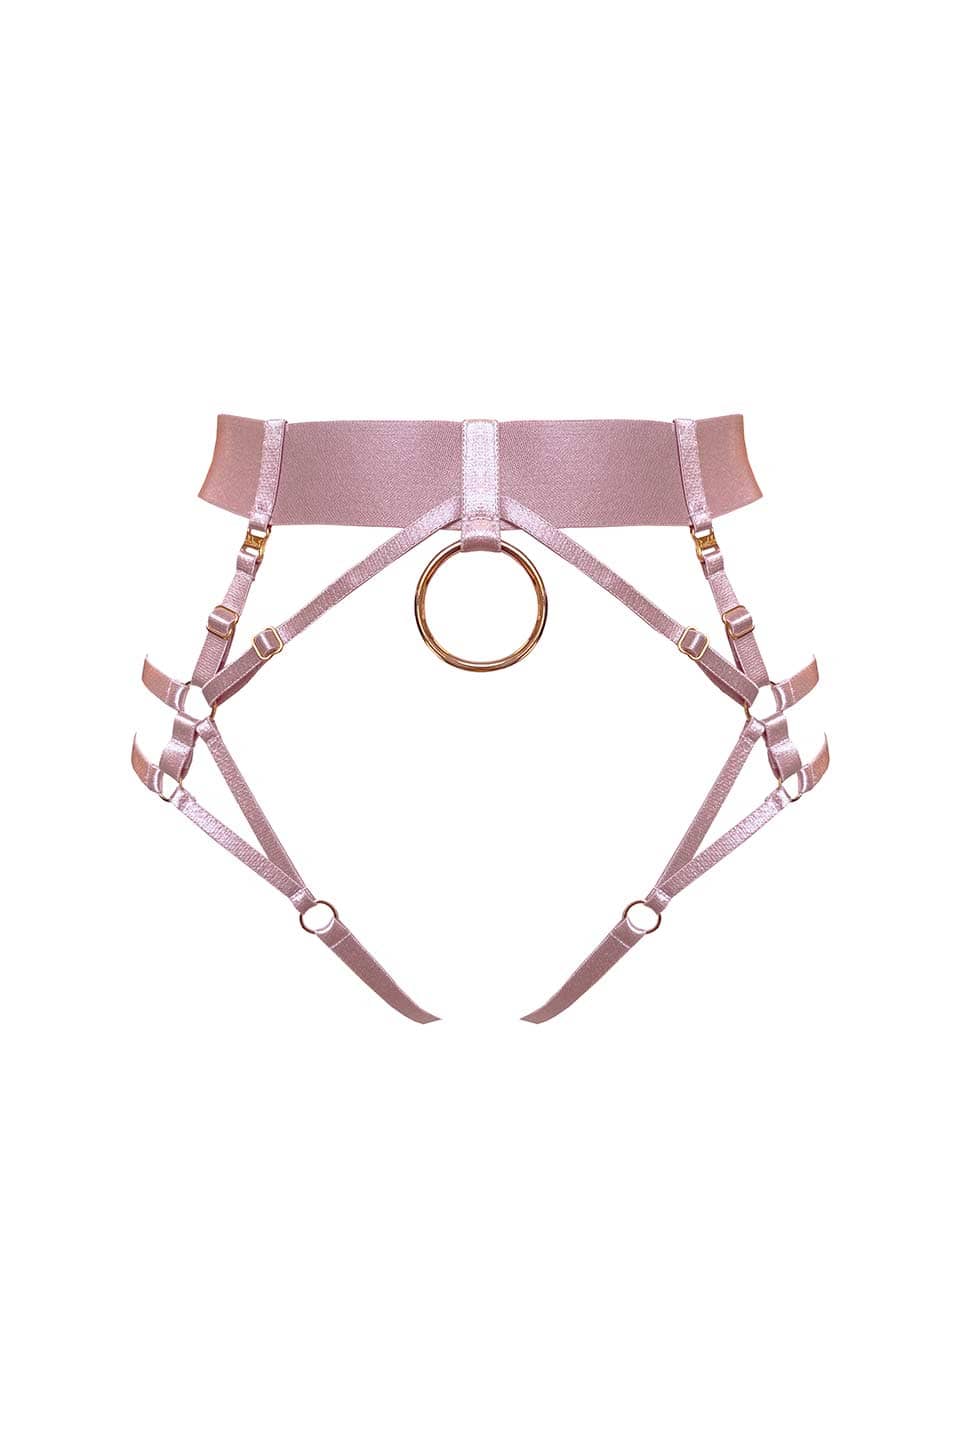 Thumbnail for Product gallery 2, Atelier bordelle kora multi style harness brief with thong rose front